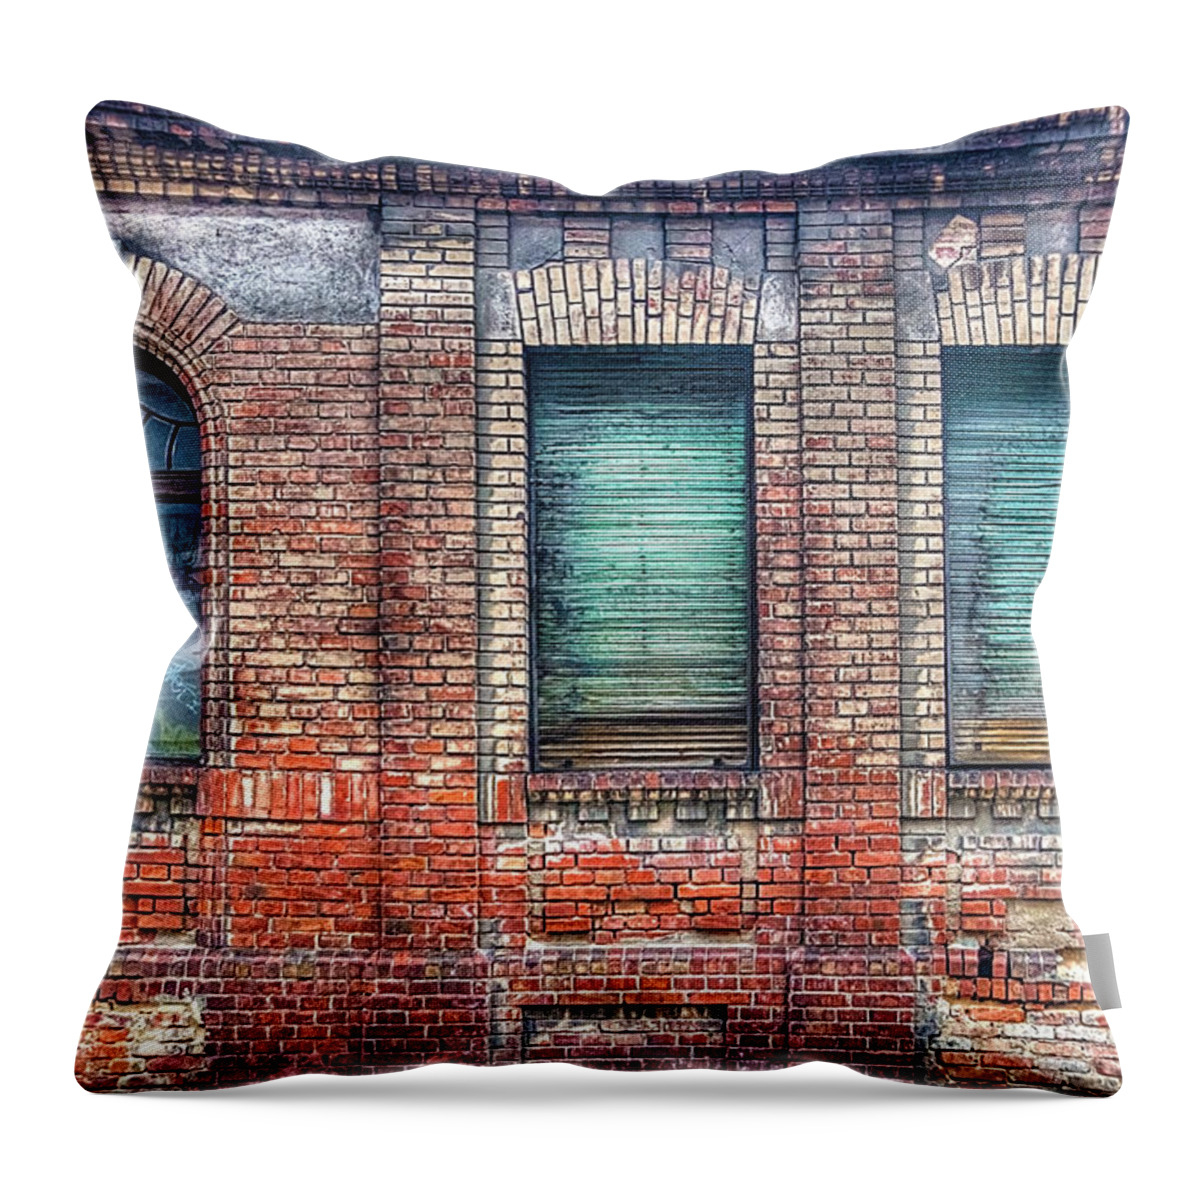 Abandoned Throw Pillow featuring the photograph Abandoned by Peter Kennett